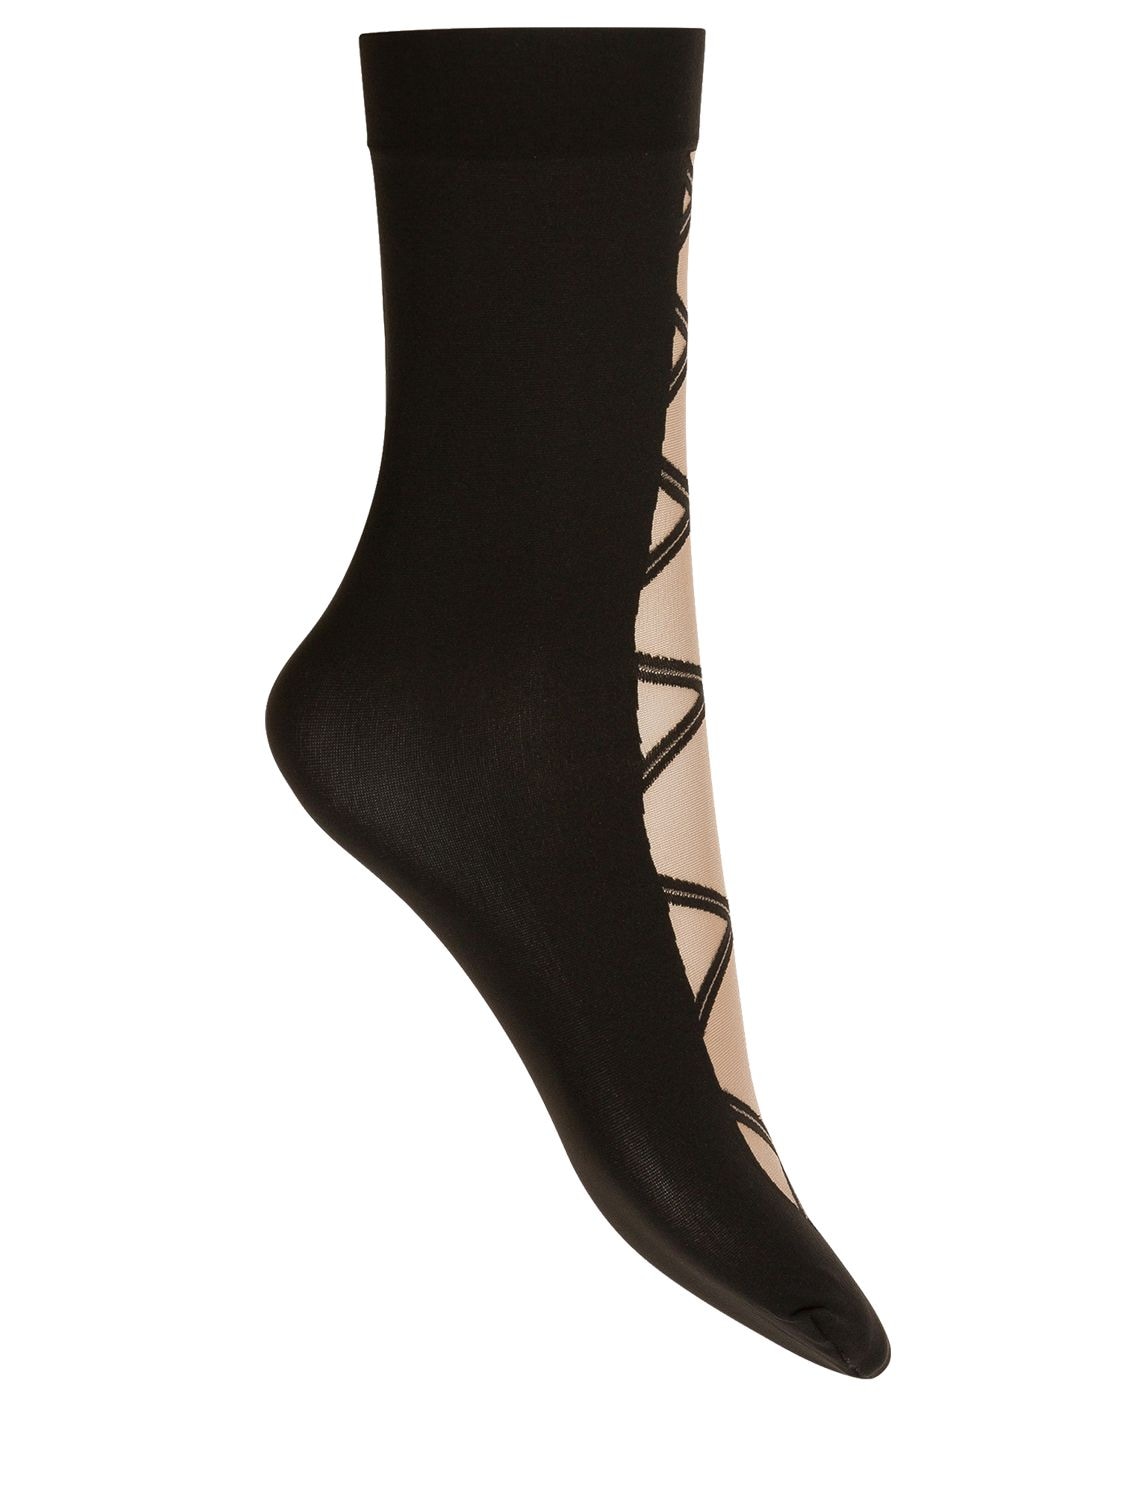 Sheer & Opaque Lace Effect Socks